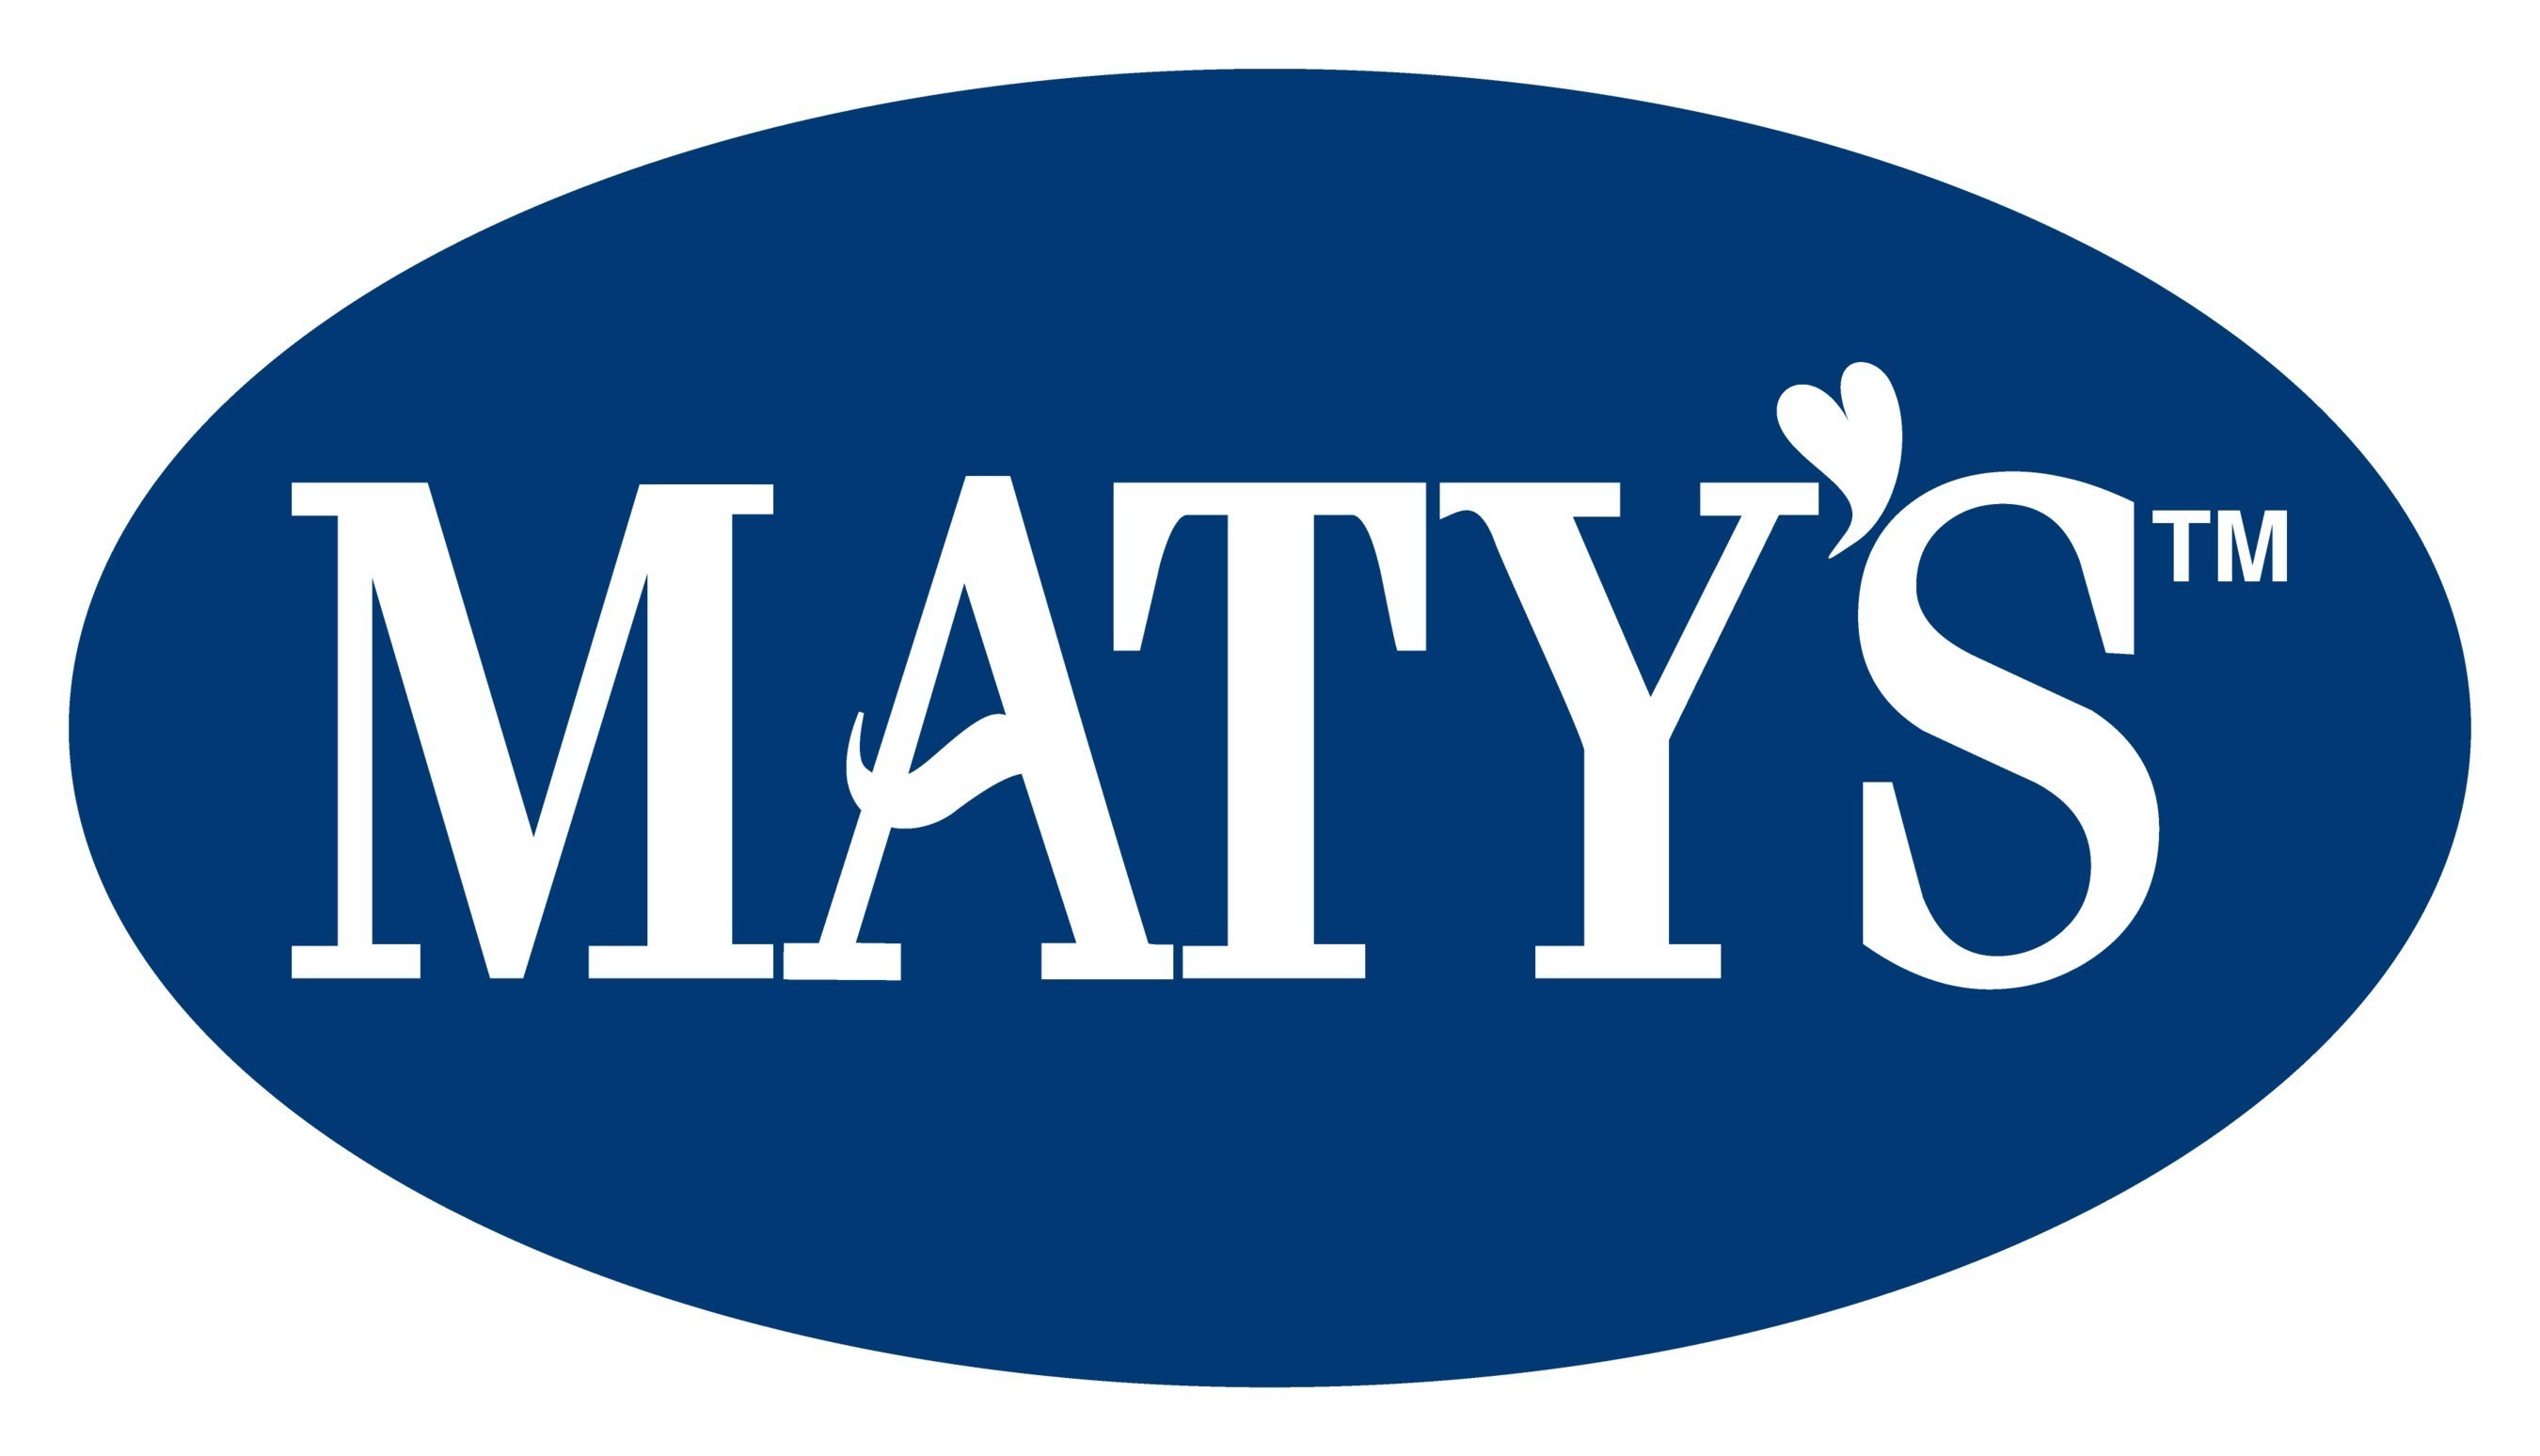 Maty's Healthy Products